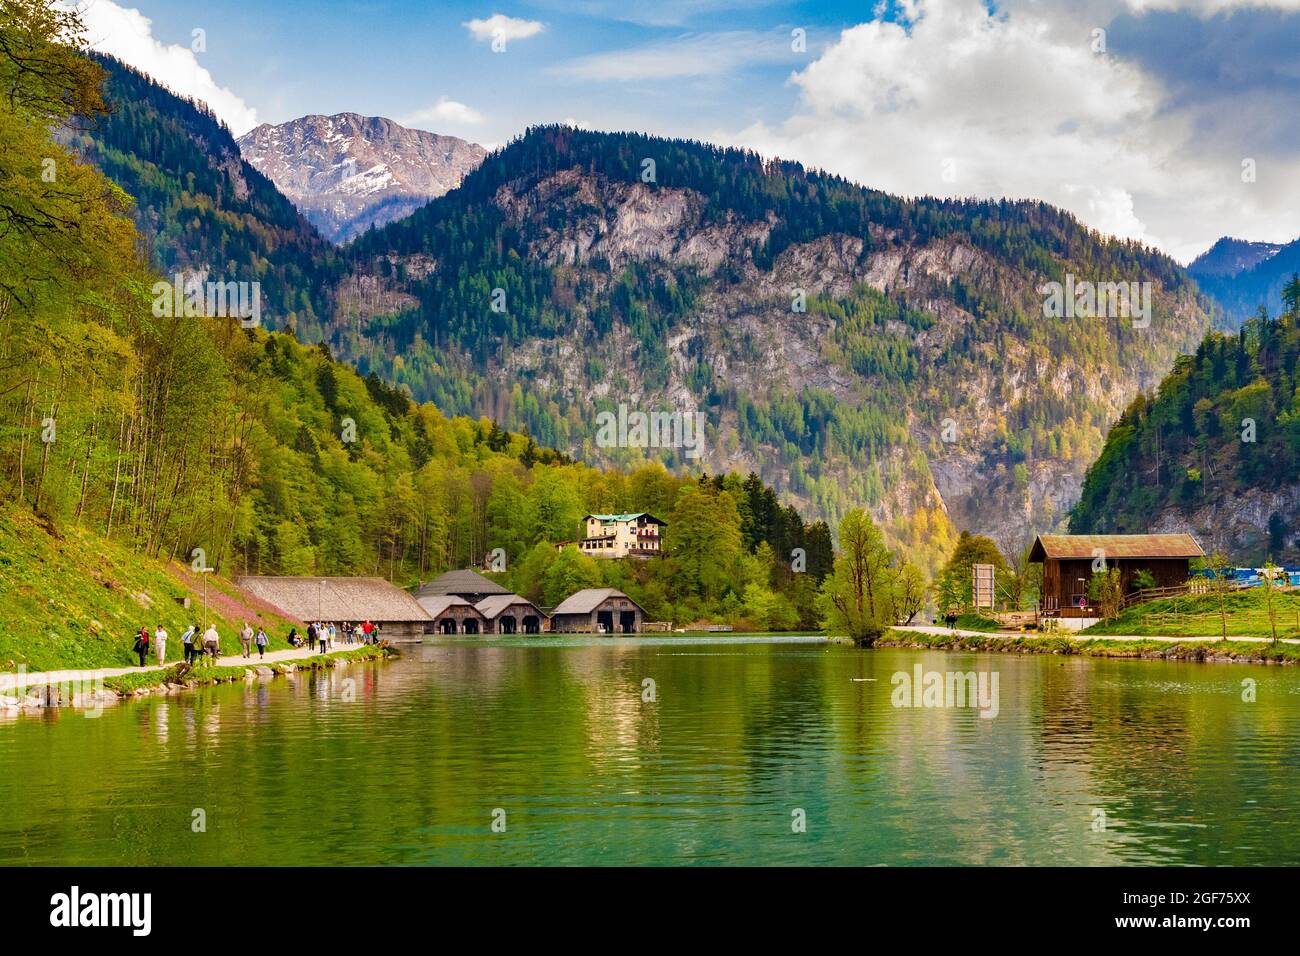 Picturesque landscape view of the northern end of the Königssee lake surrounded by mountains in Bavaria, Germany. In front is a row of boathouses and... Stock Photo